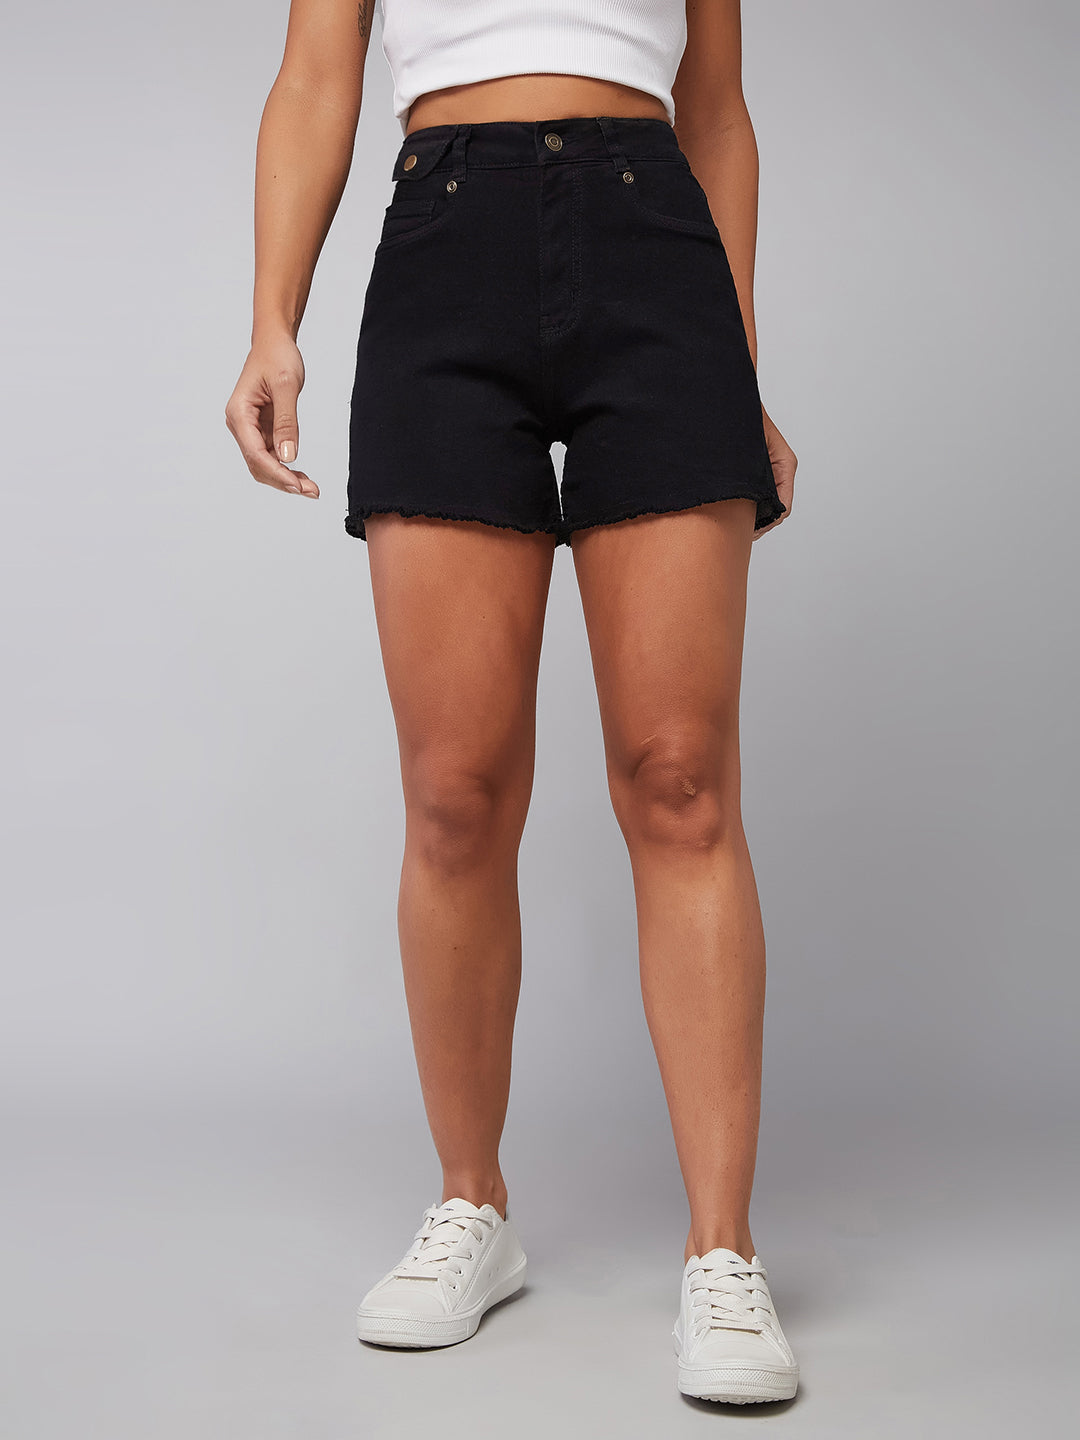 Women's Black Relaxed Fit High Rise Clean Look Regular Length Stretchable Denim Shorts